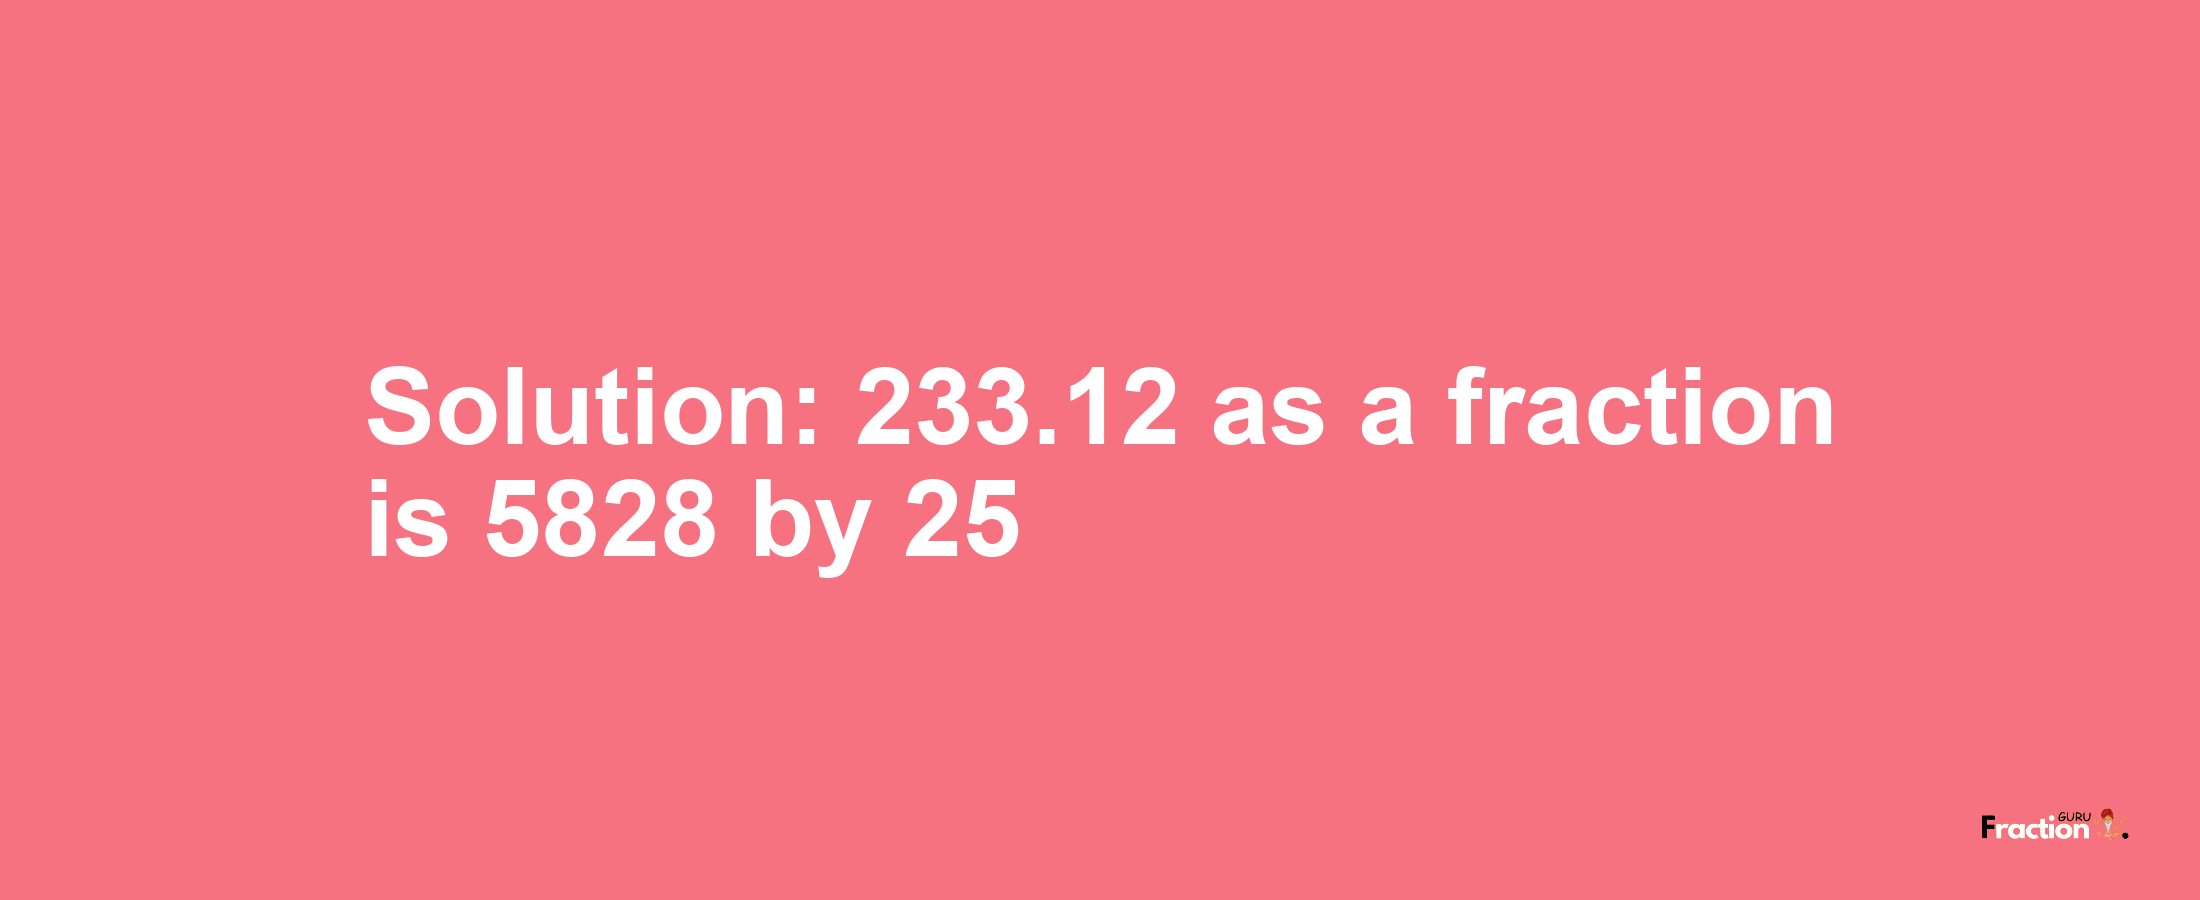 Solution:233.12 as a fraction is 5828/25